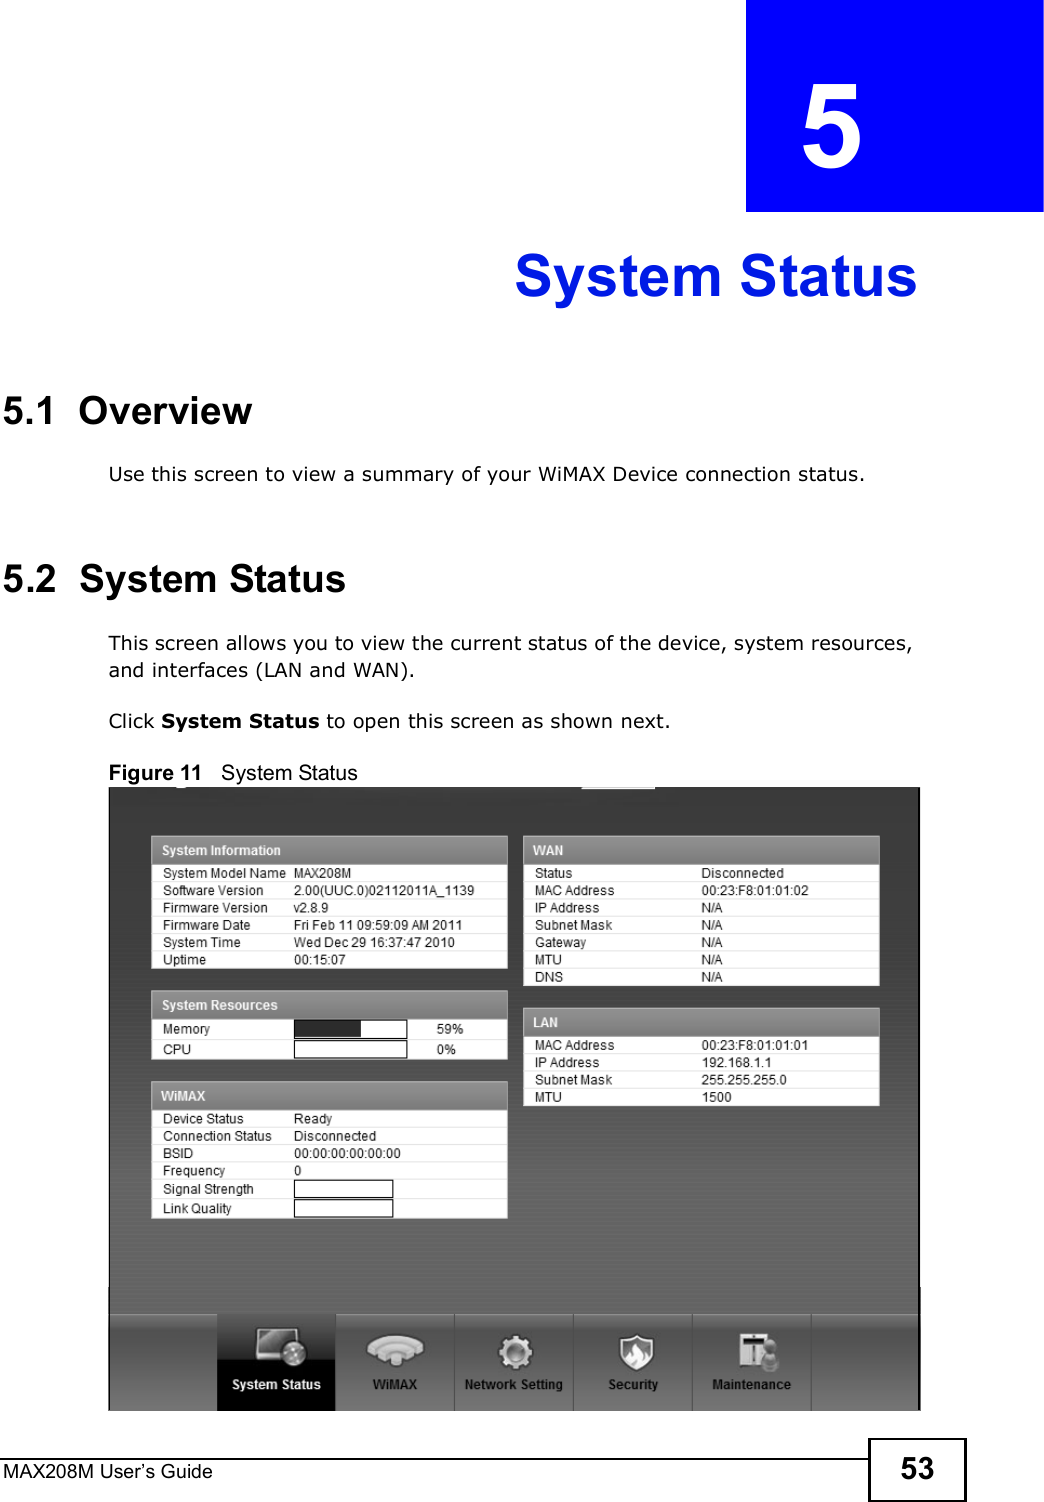 MAX208M User s Guide 53CHAPTER  5 System Status5.1  OverviewUse this screen to view a summary of your WiMAX Device connection status.5.2  System StatusThis screen allows you to view the current status of the device, system resources, and interfaces (LAN and WAN).Click System Status to open this screen as shown next.Figure 11   System Status